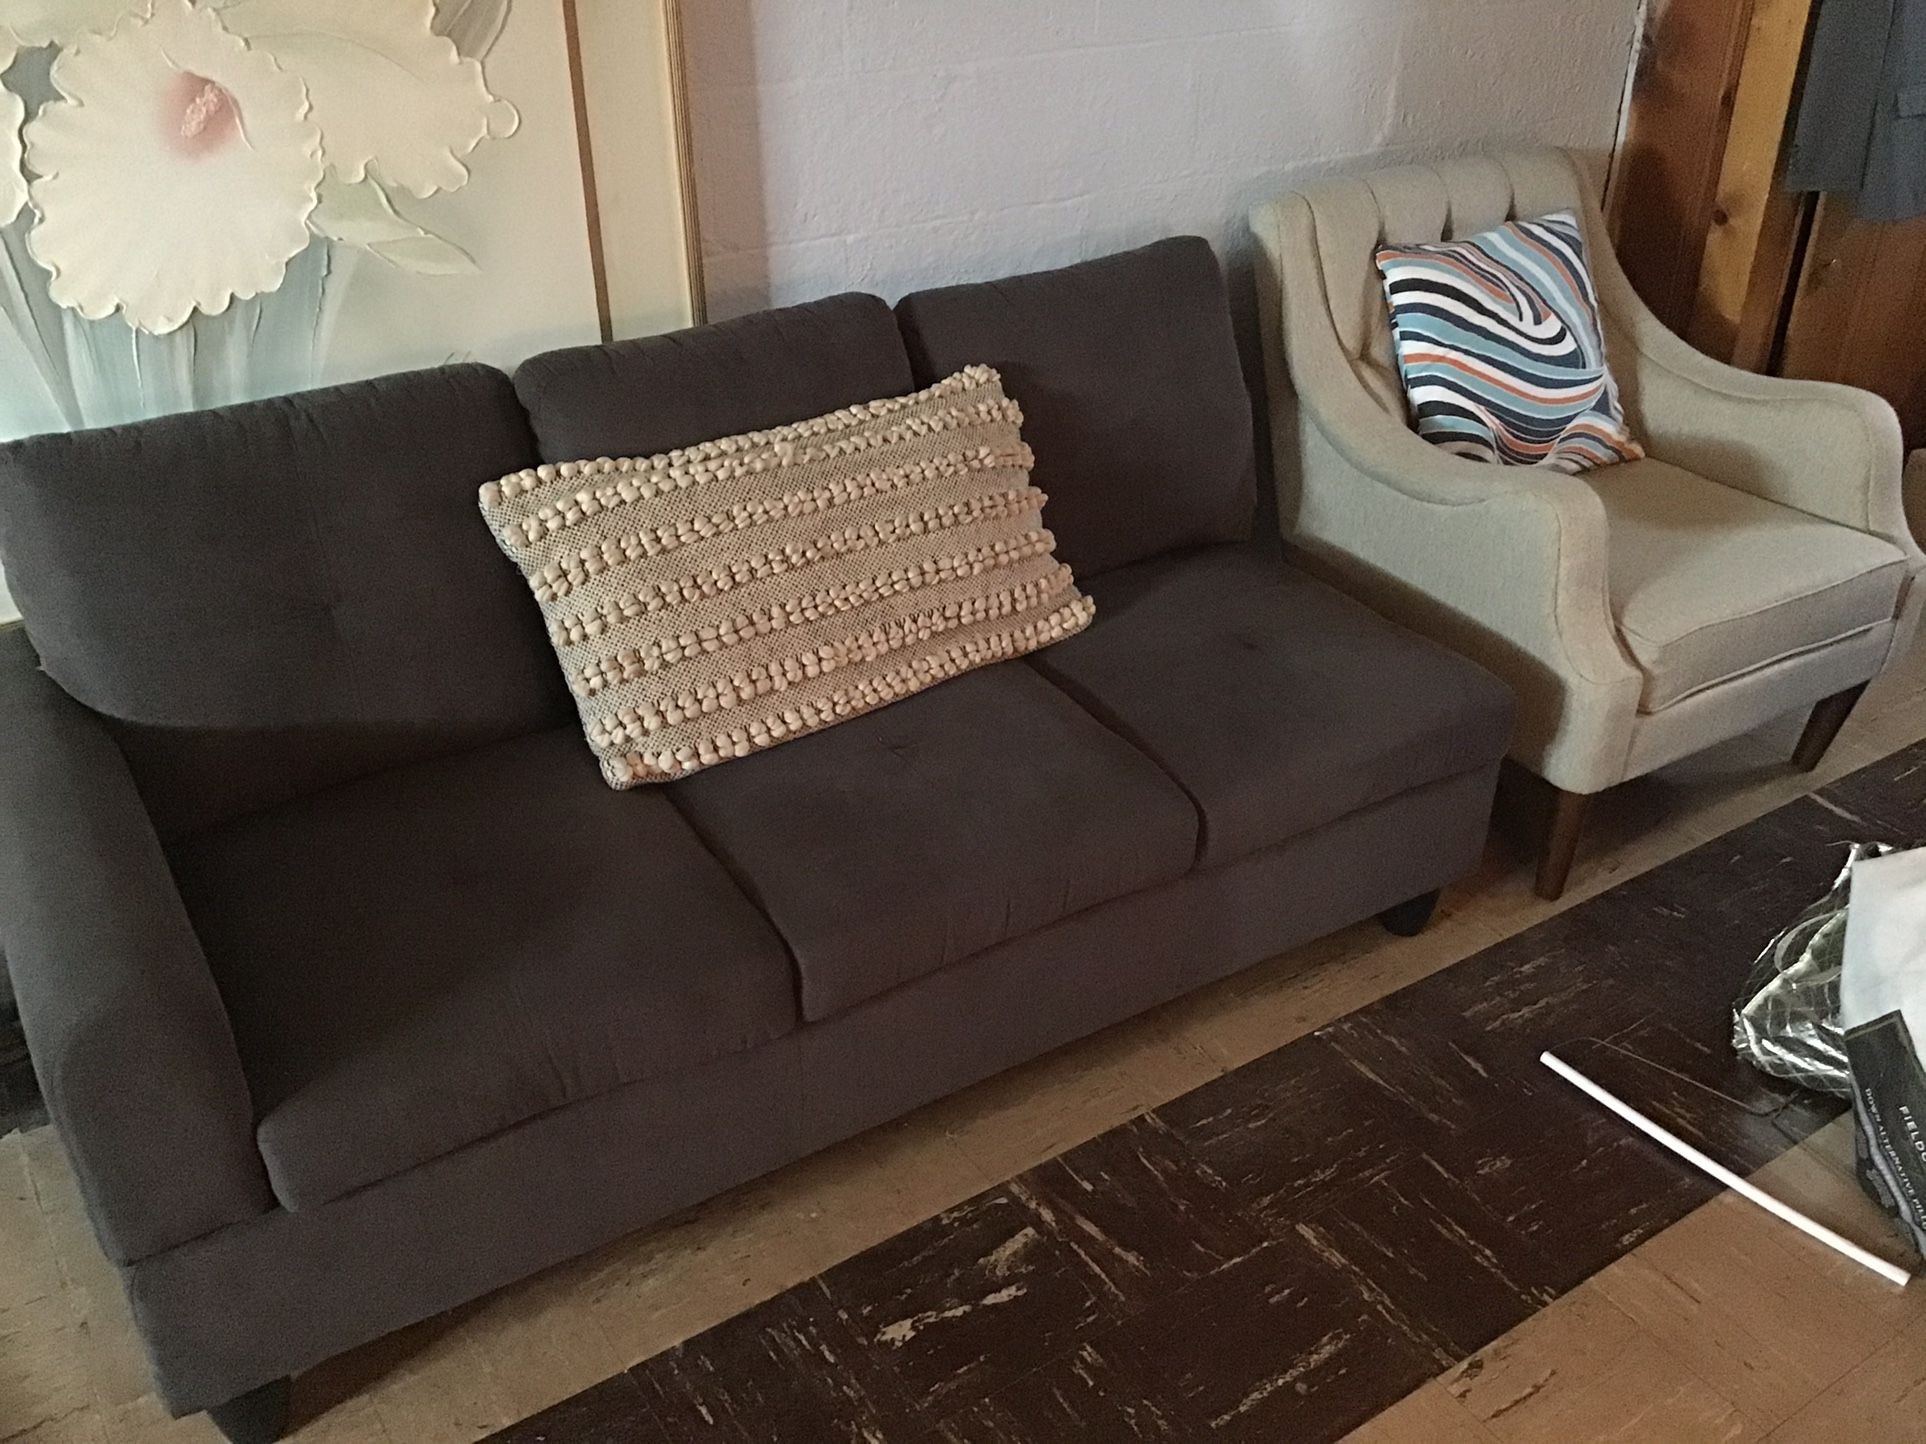 Furniture Set Couch And Chair 2 Months Old Still Looks New $175.00